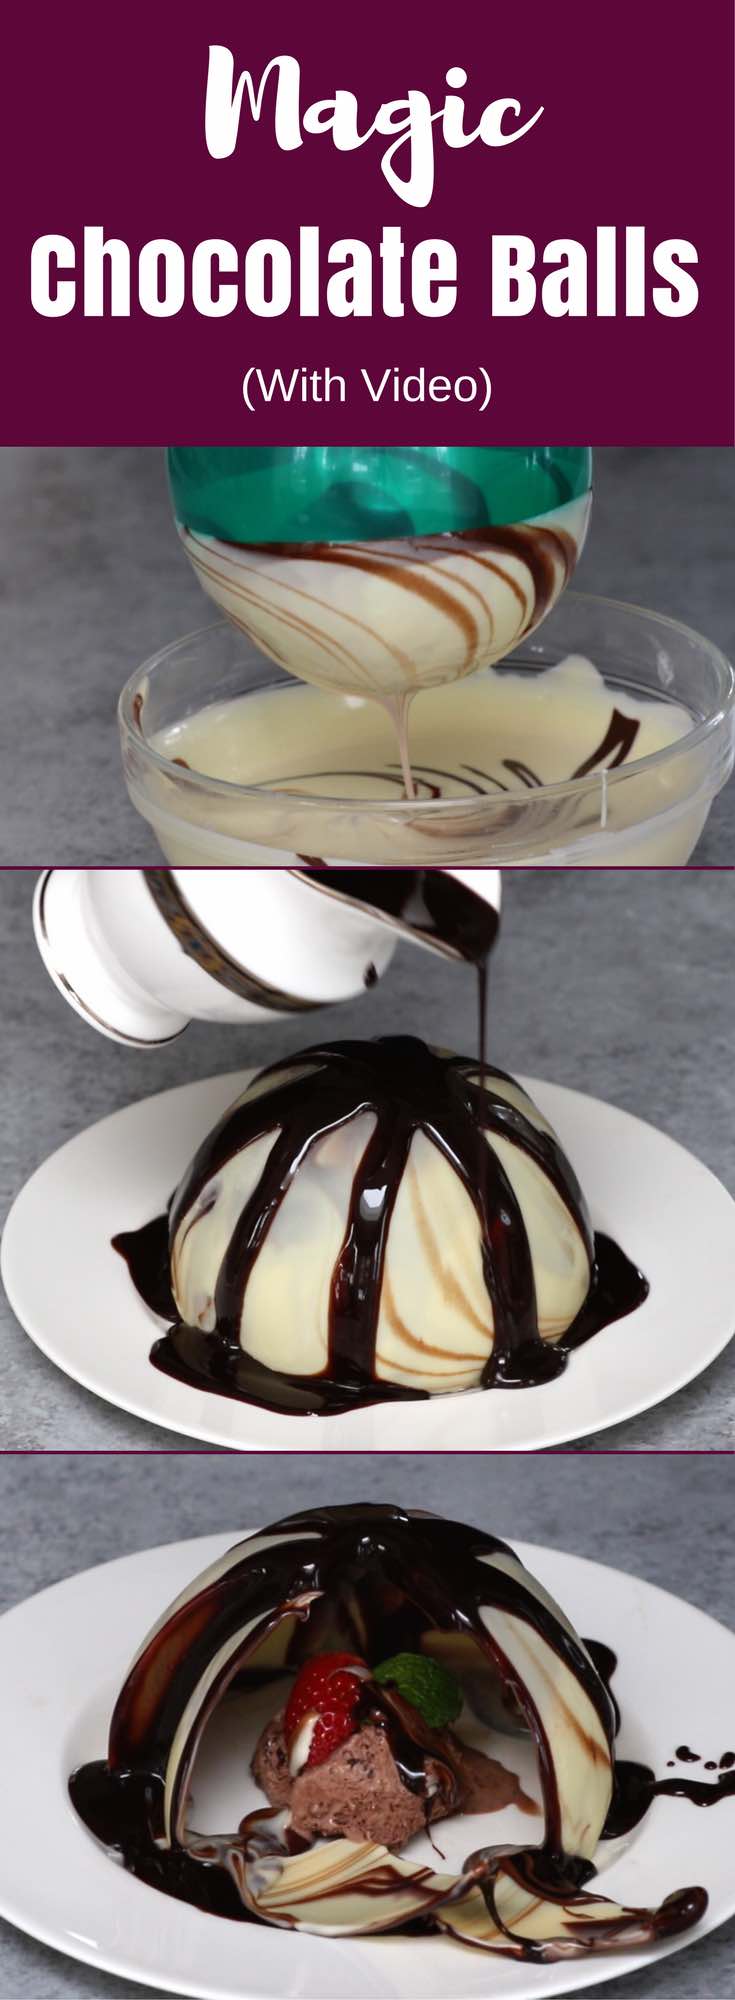 Magic Chocolate Balls are a stunning dessert presentation These Melting Chocolate Balls are a stunning dessert presentation! You use a balloon to create a chocolate sphere that covers a small dessert. Then pour warm sauce on top to melt the magic chocolate ball for a dramatic reveal! #magicchocolateball #meltingchocolateball #chocolatesphere